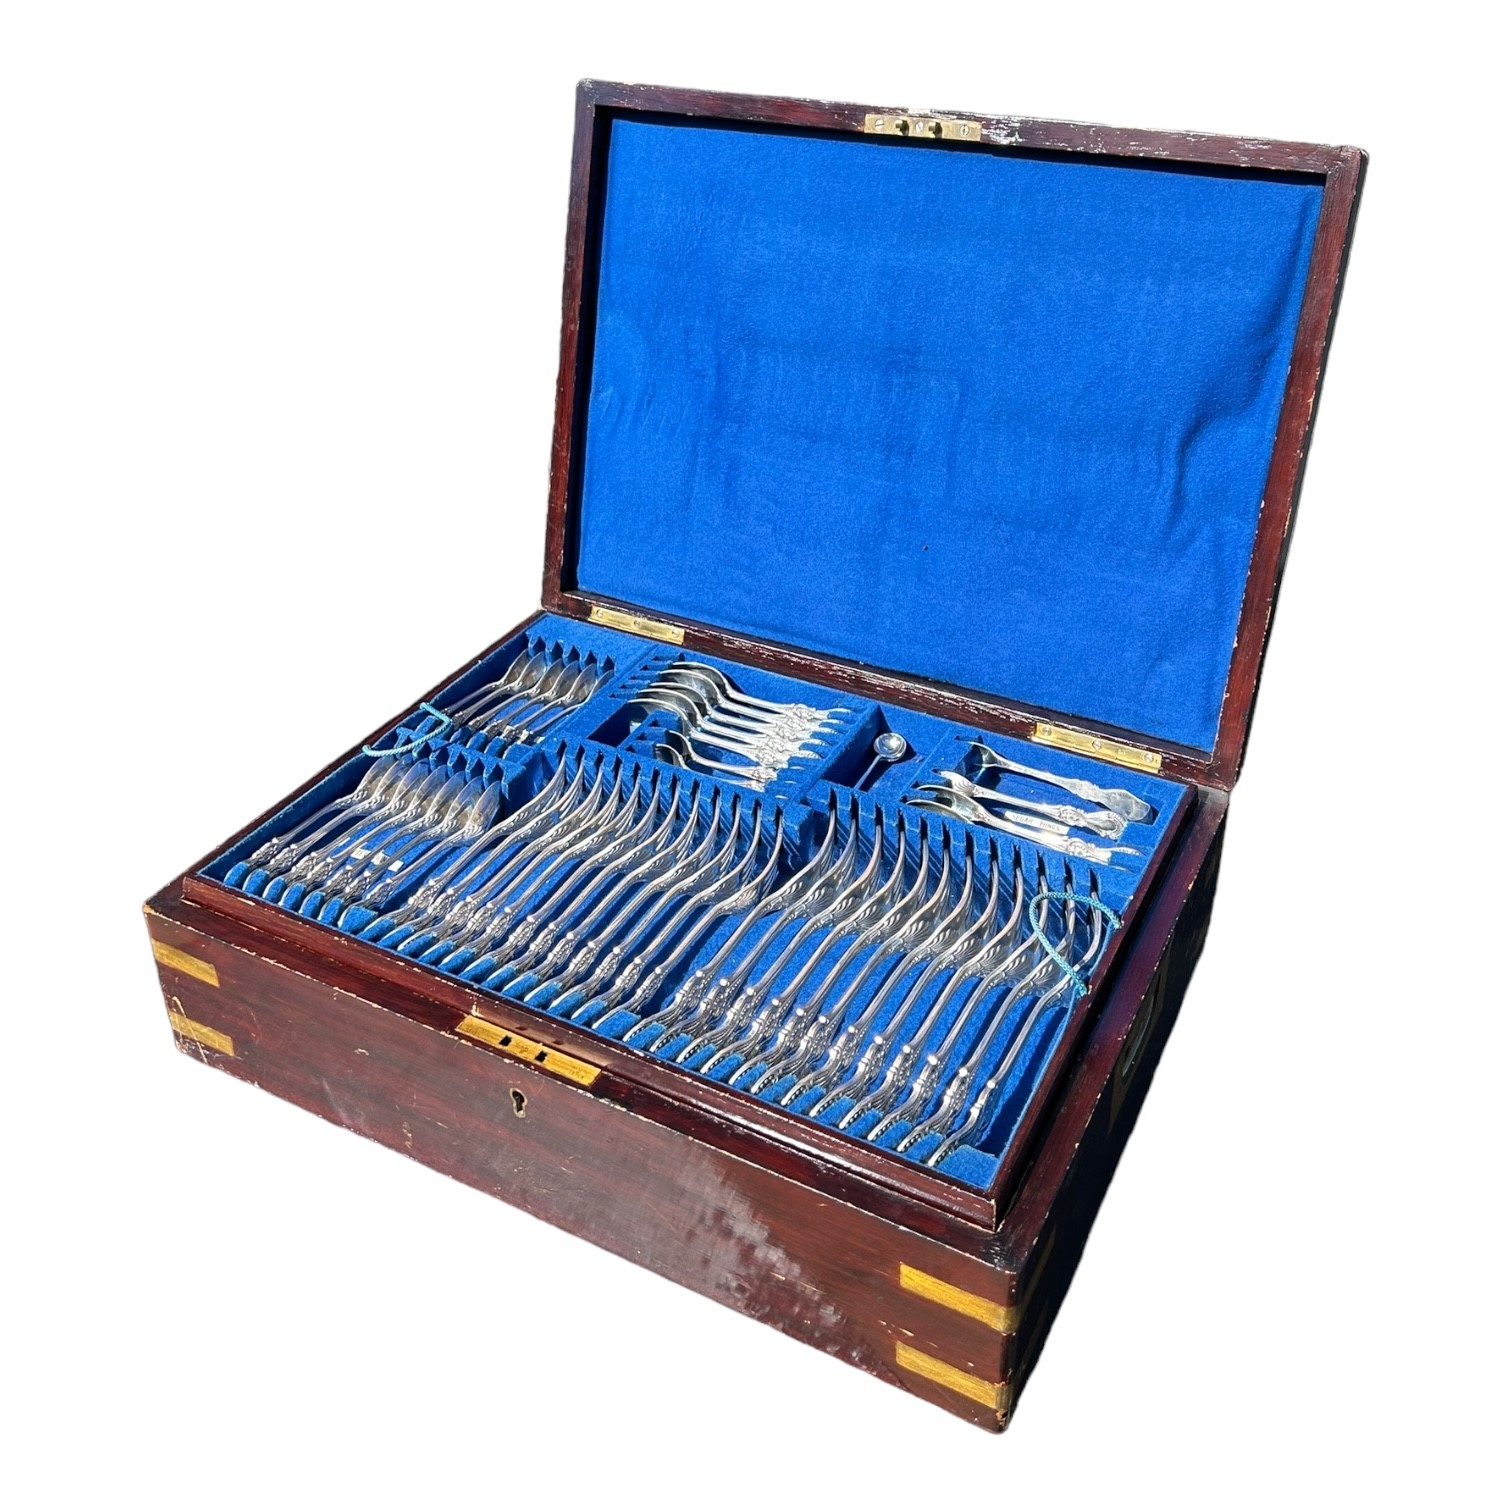 JOHN ROUND & SON LTD, A CASED VICTORIAN SILVER CANTEEN OF CUTLERY, 82 PIECES, HALLMARKED - Image 2 of 4